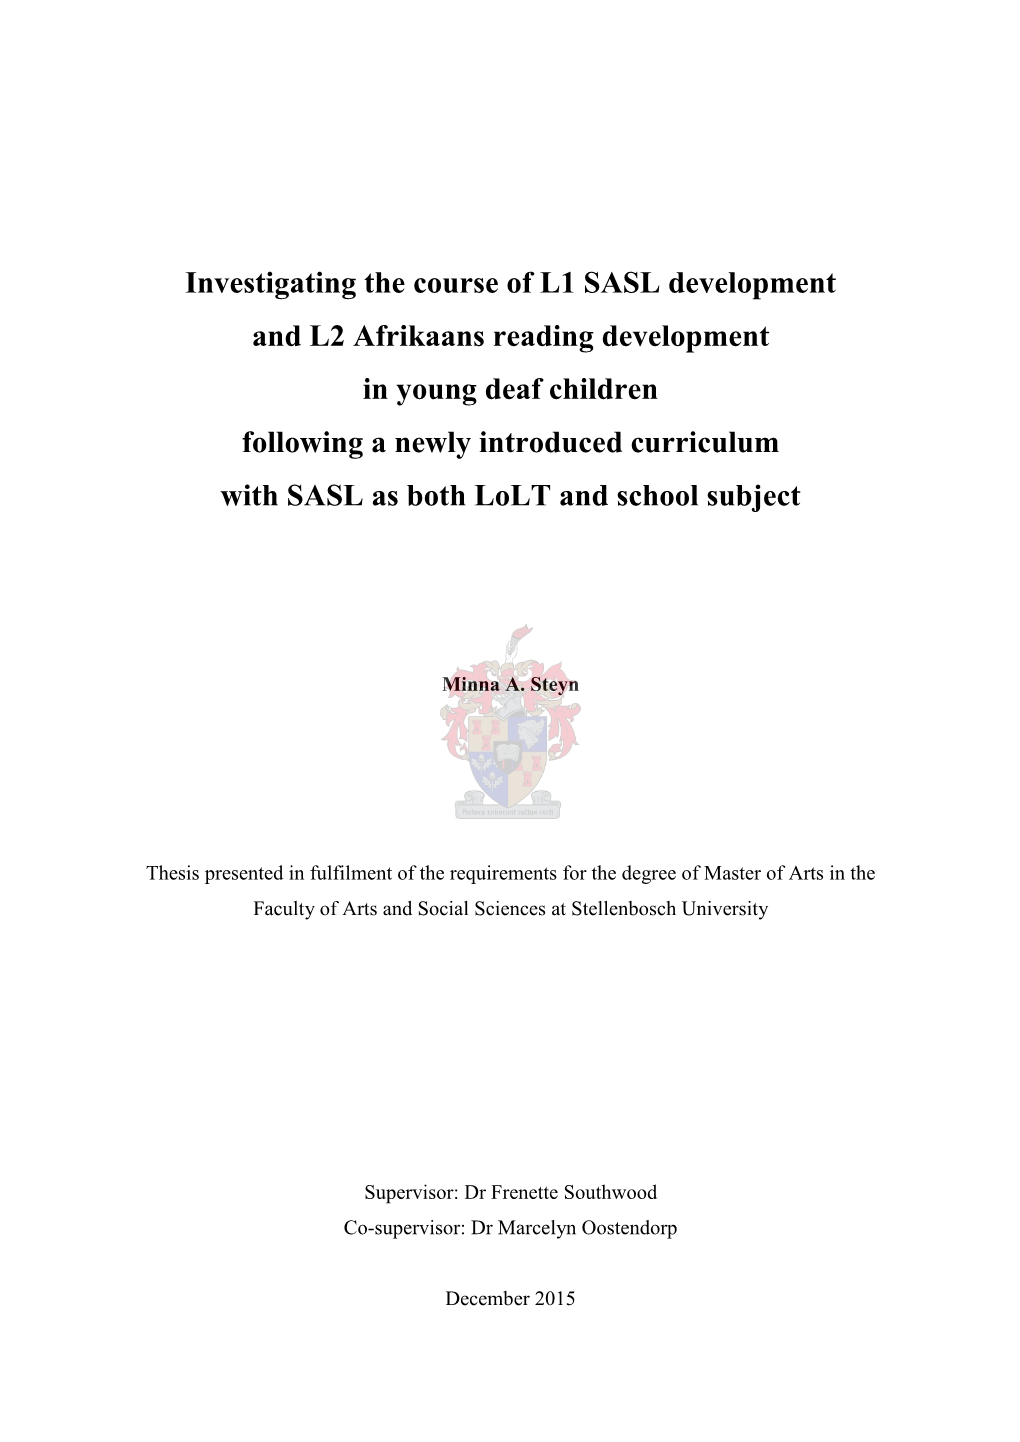 Investigating the Course of L1 SASL Development and L2 Afrikaans